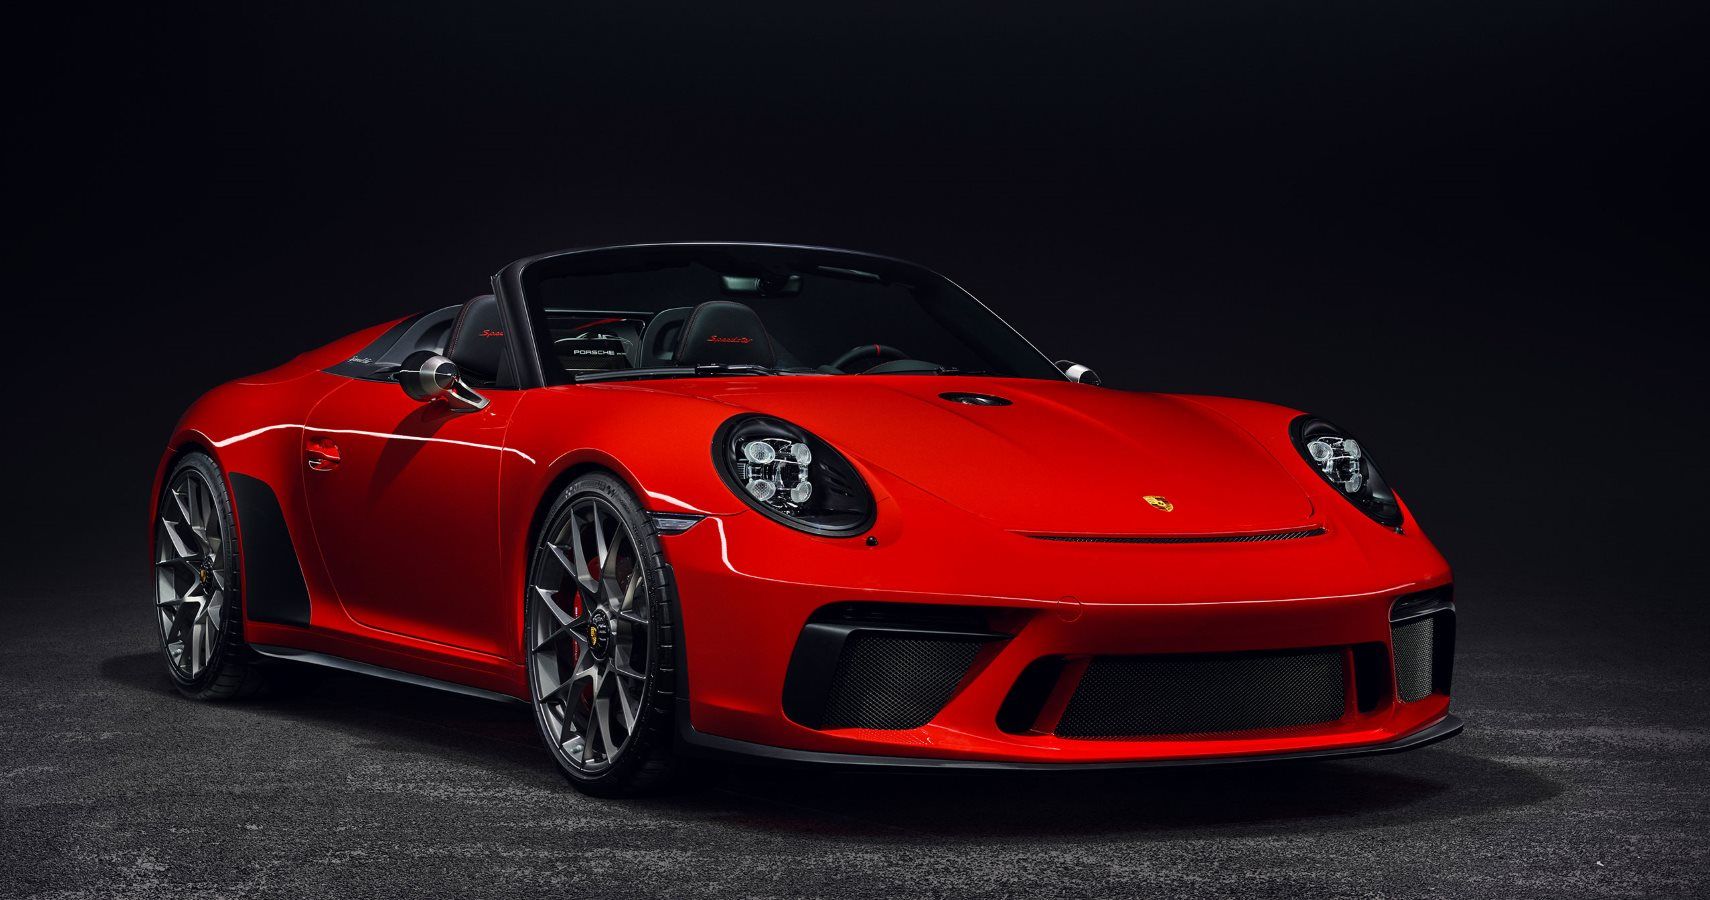 Upcoming Porsche 911 Speedster Image Leaked Thanks To Party Invite